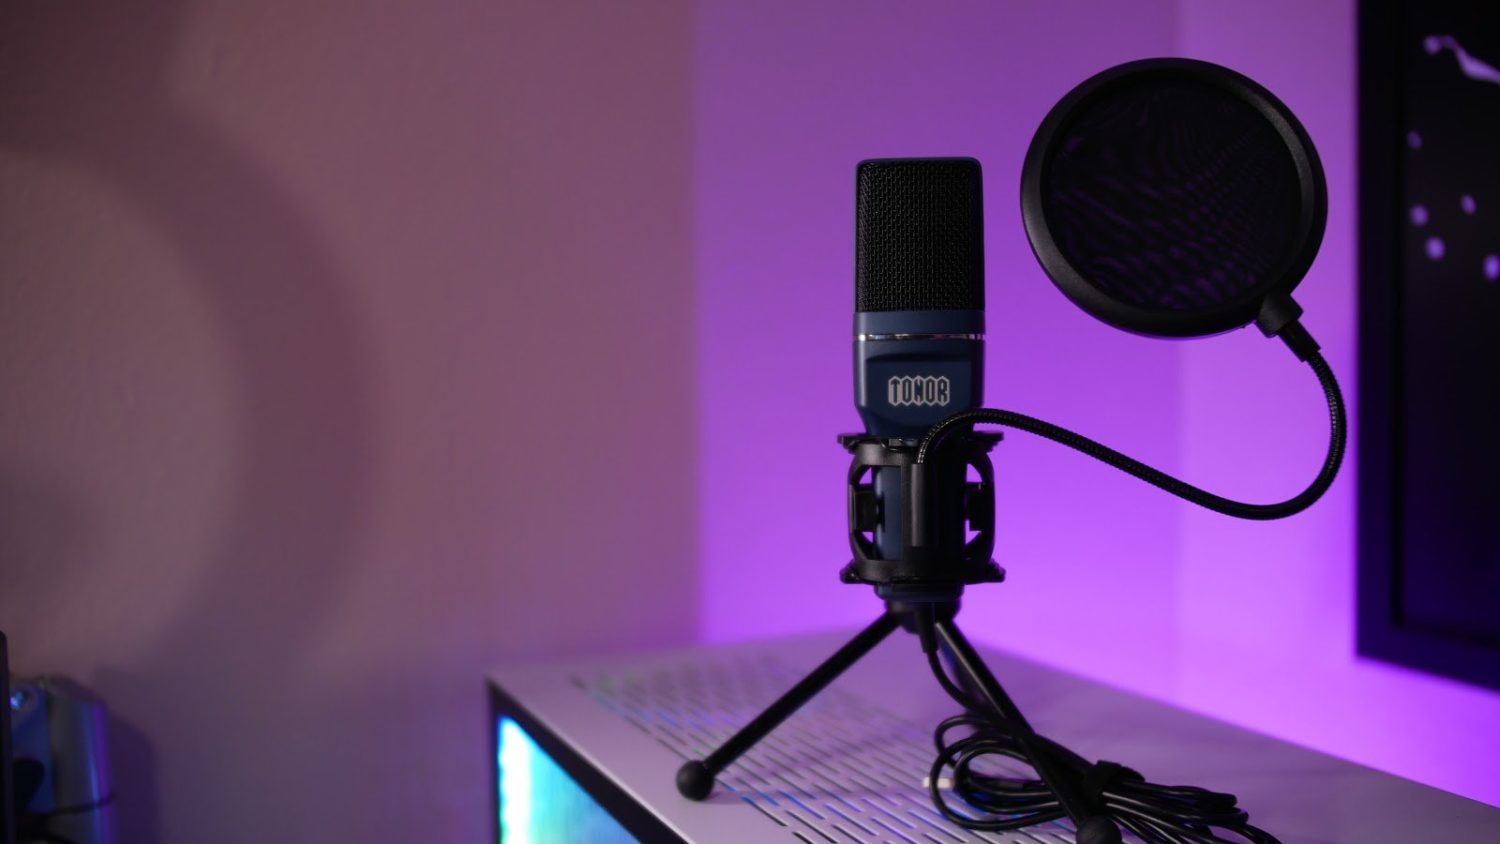 TONOR TC-777 Microphone review - featured